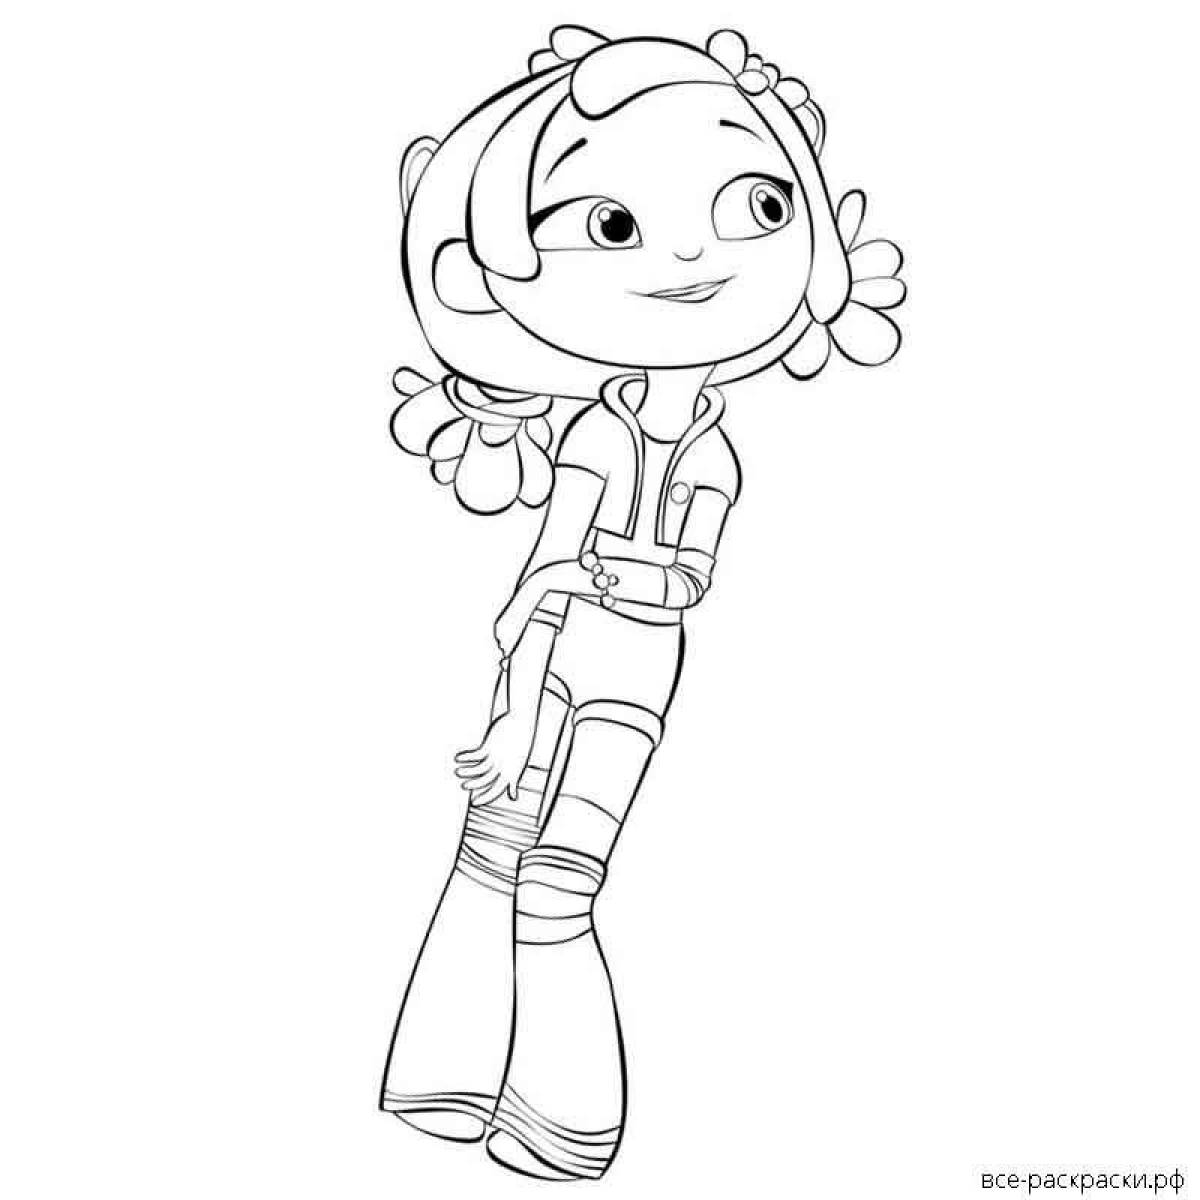 Animated snow patrol coloring page